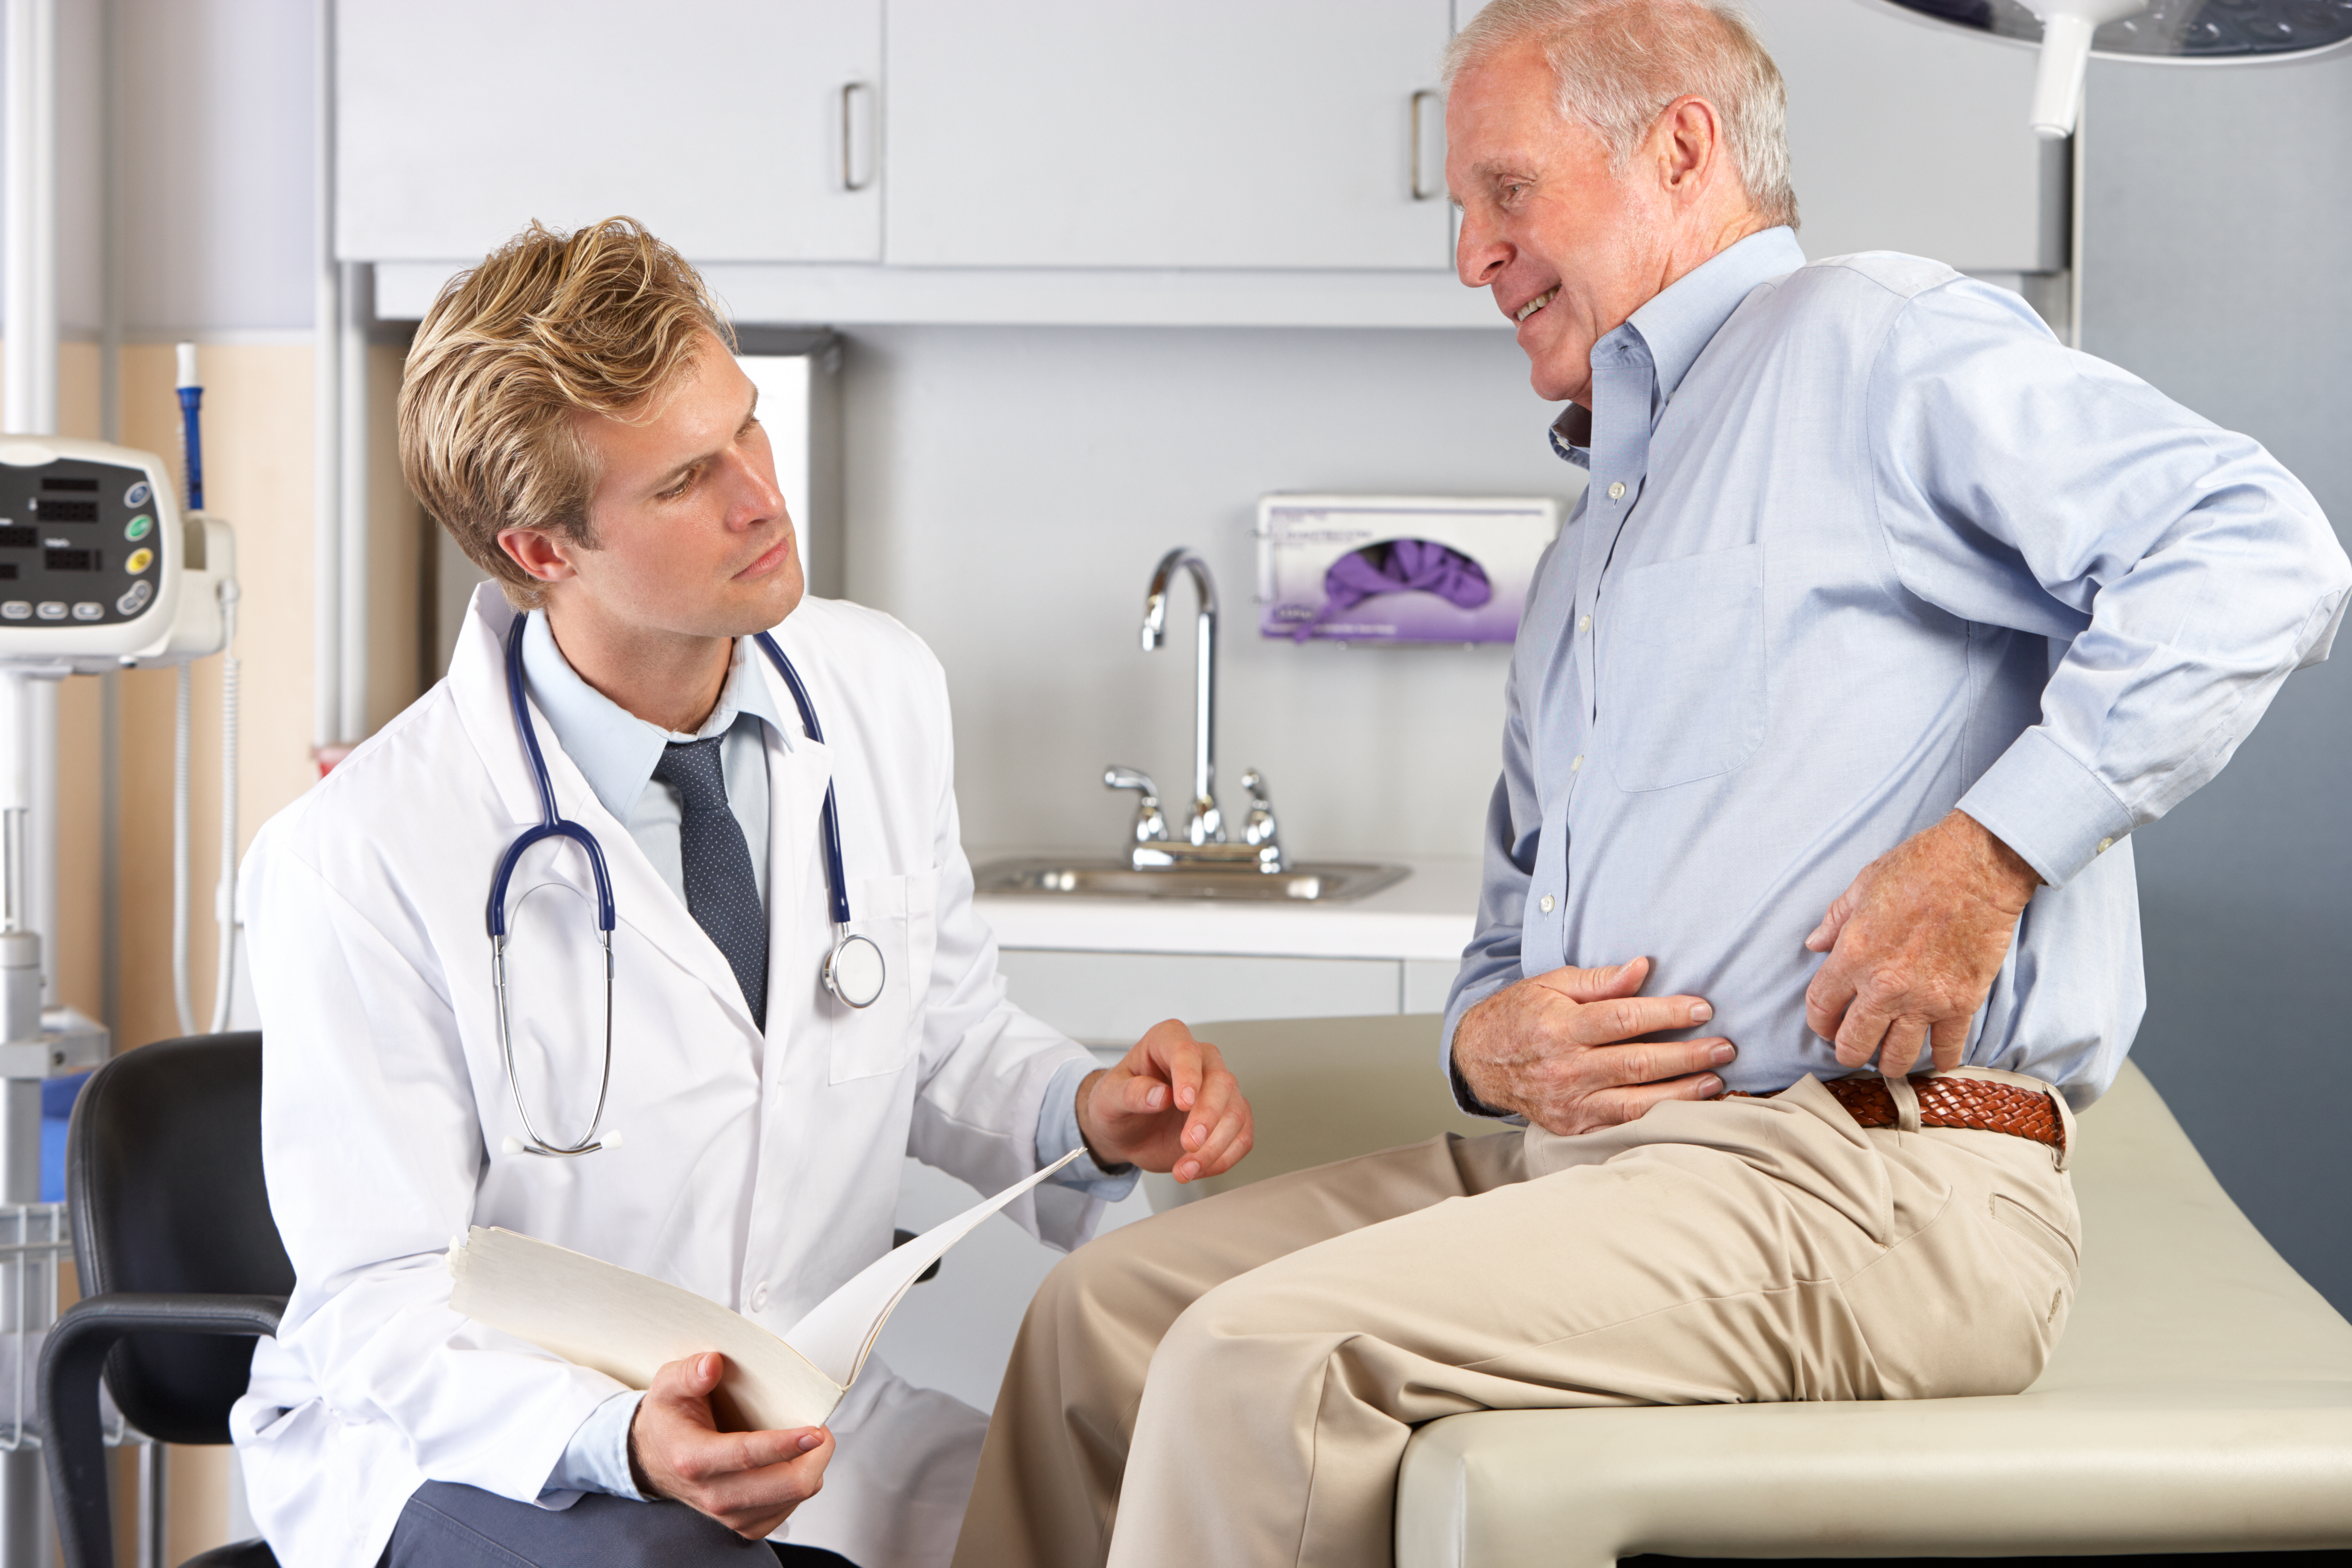 defective hip replacements cause pain